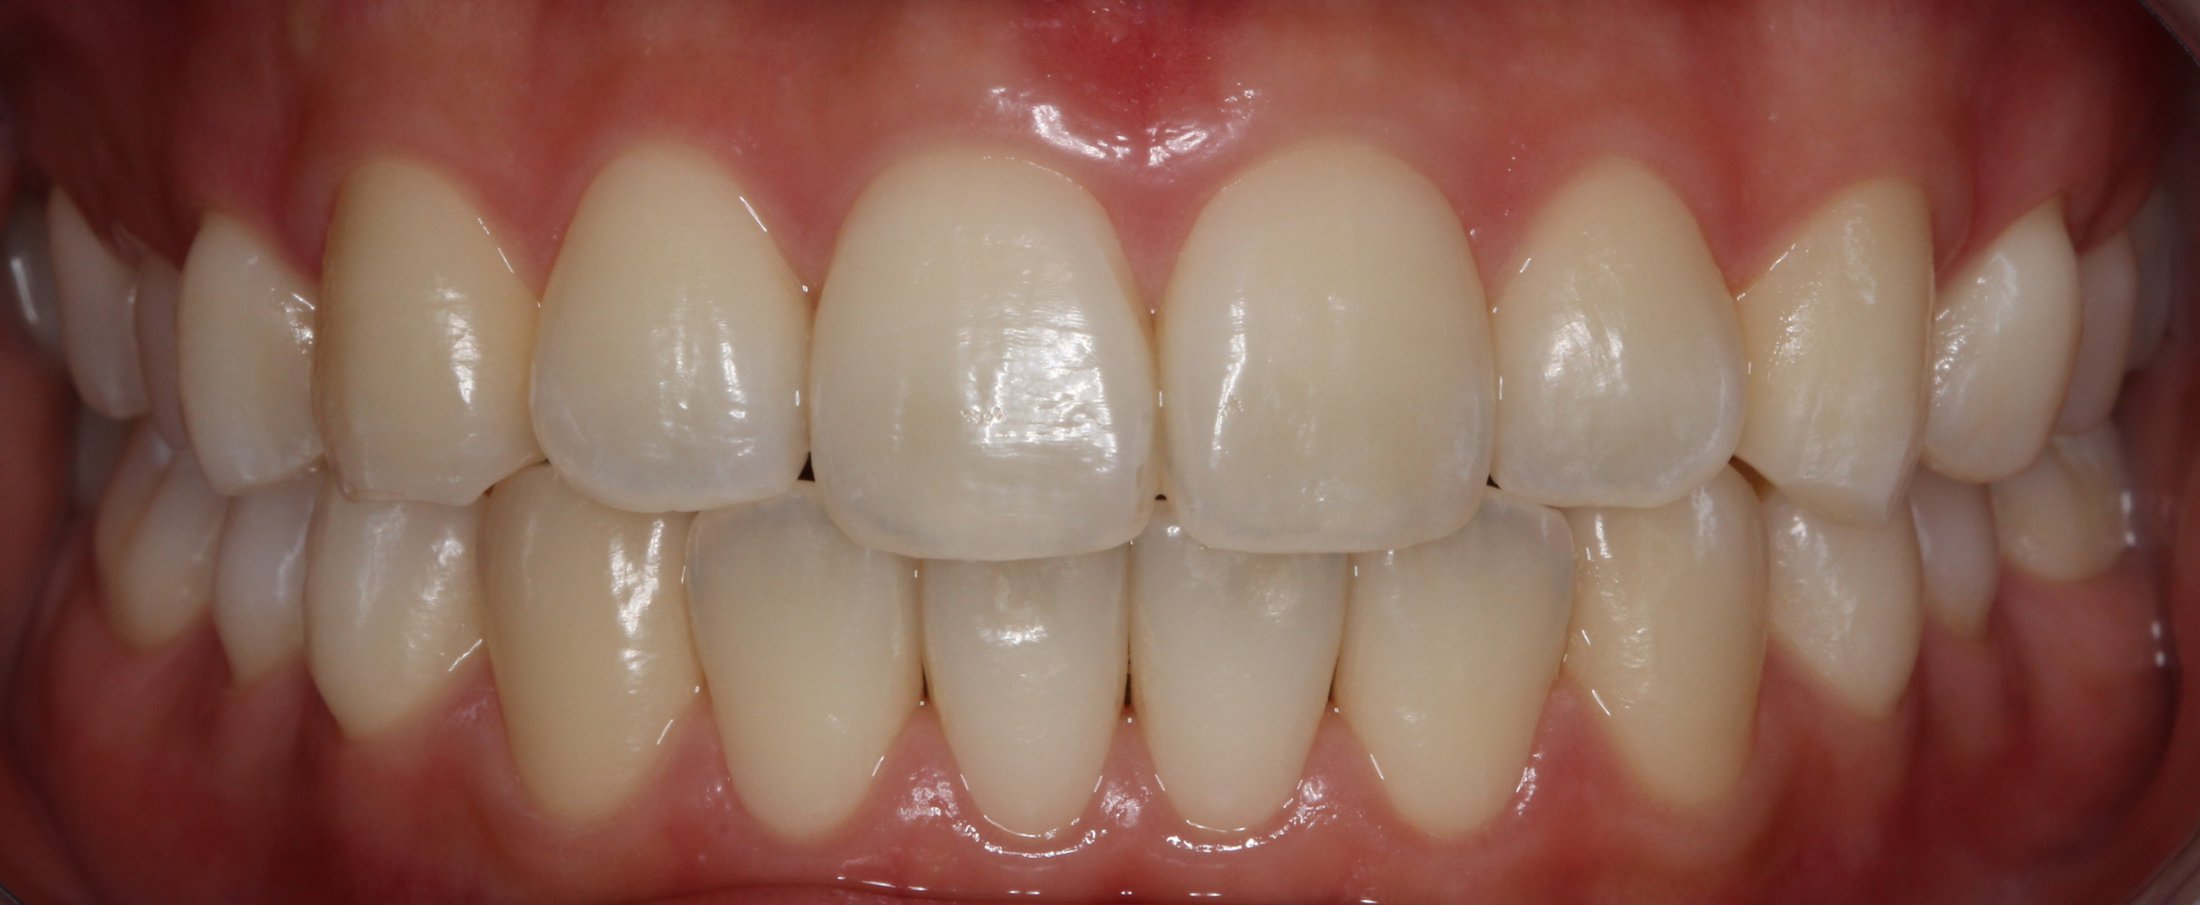 Patient's mouth before teeth whitening